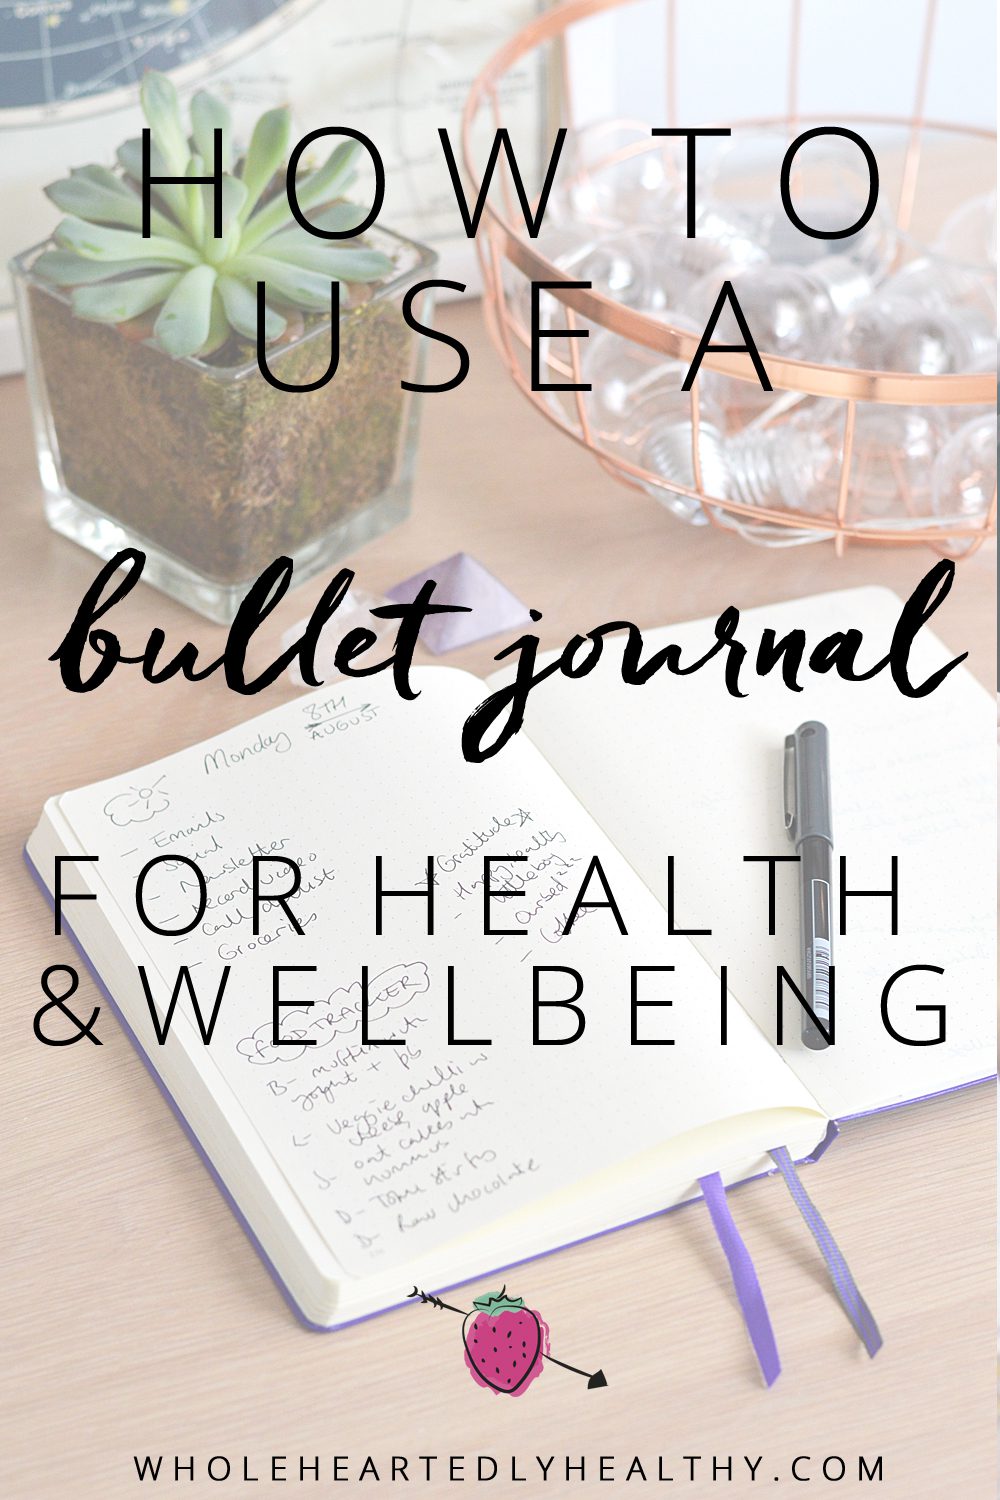 How to use a bullet journal for health and wellbeing